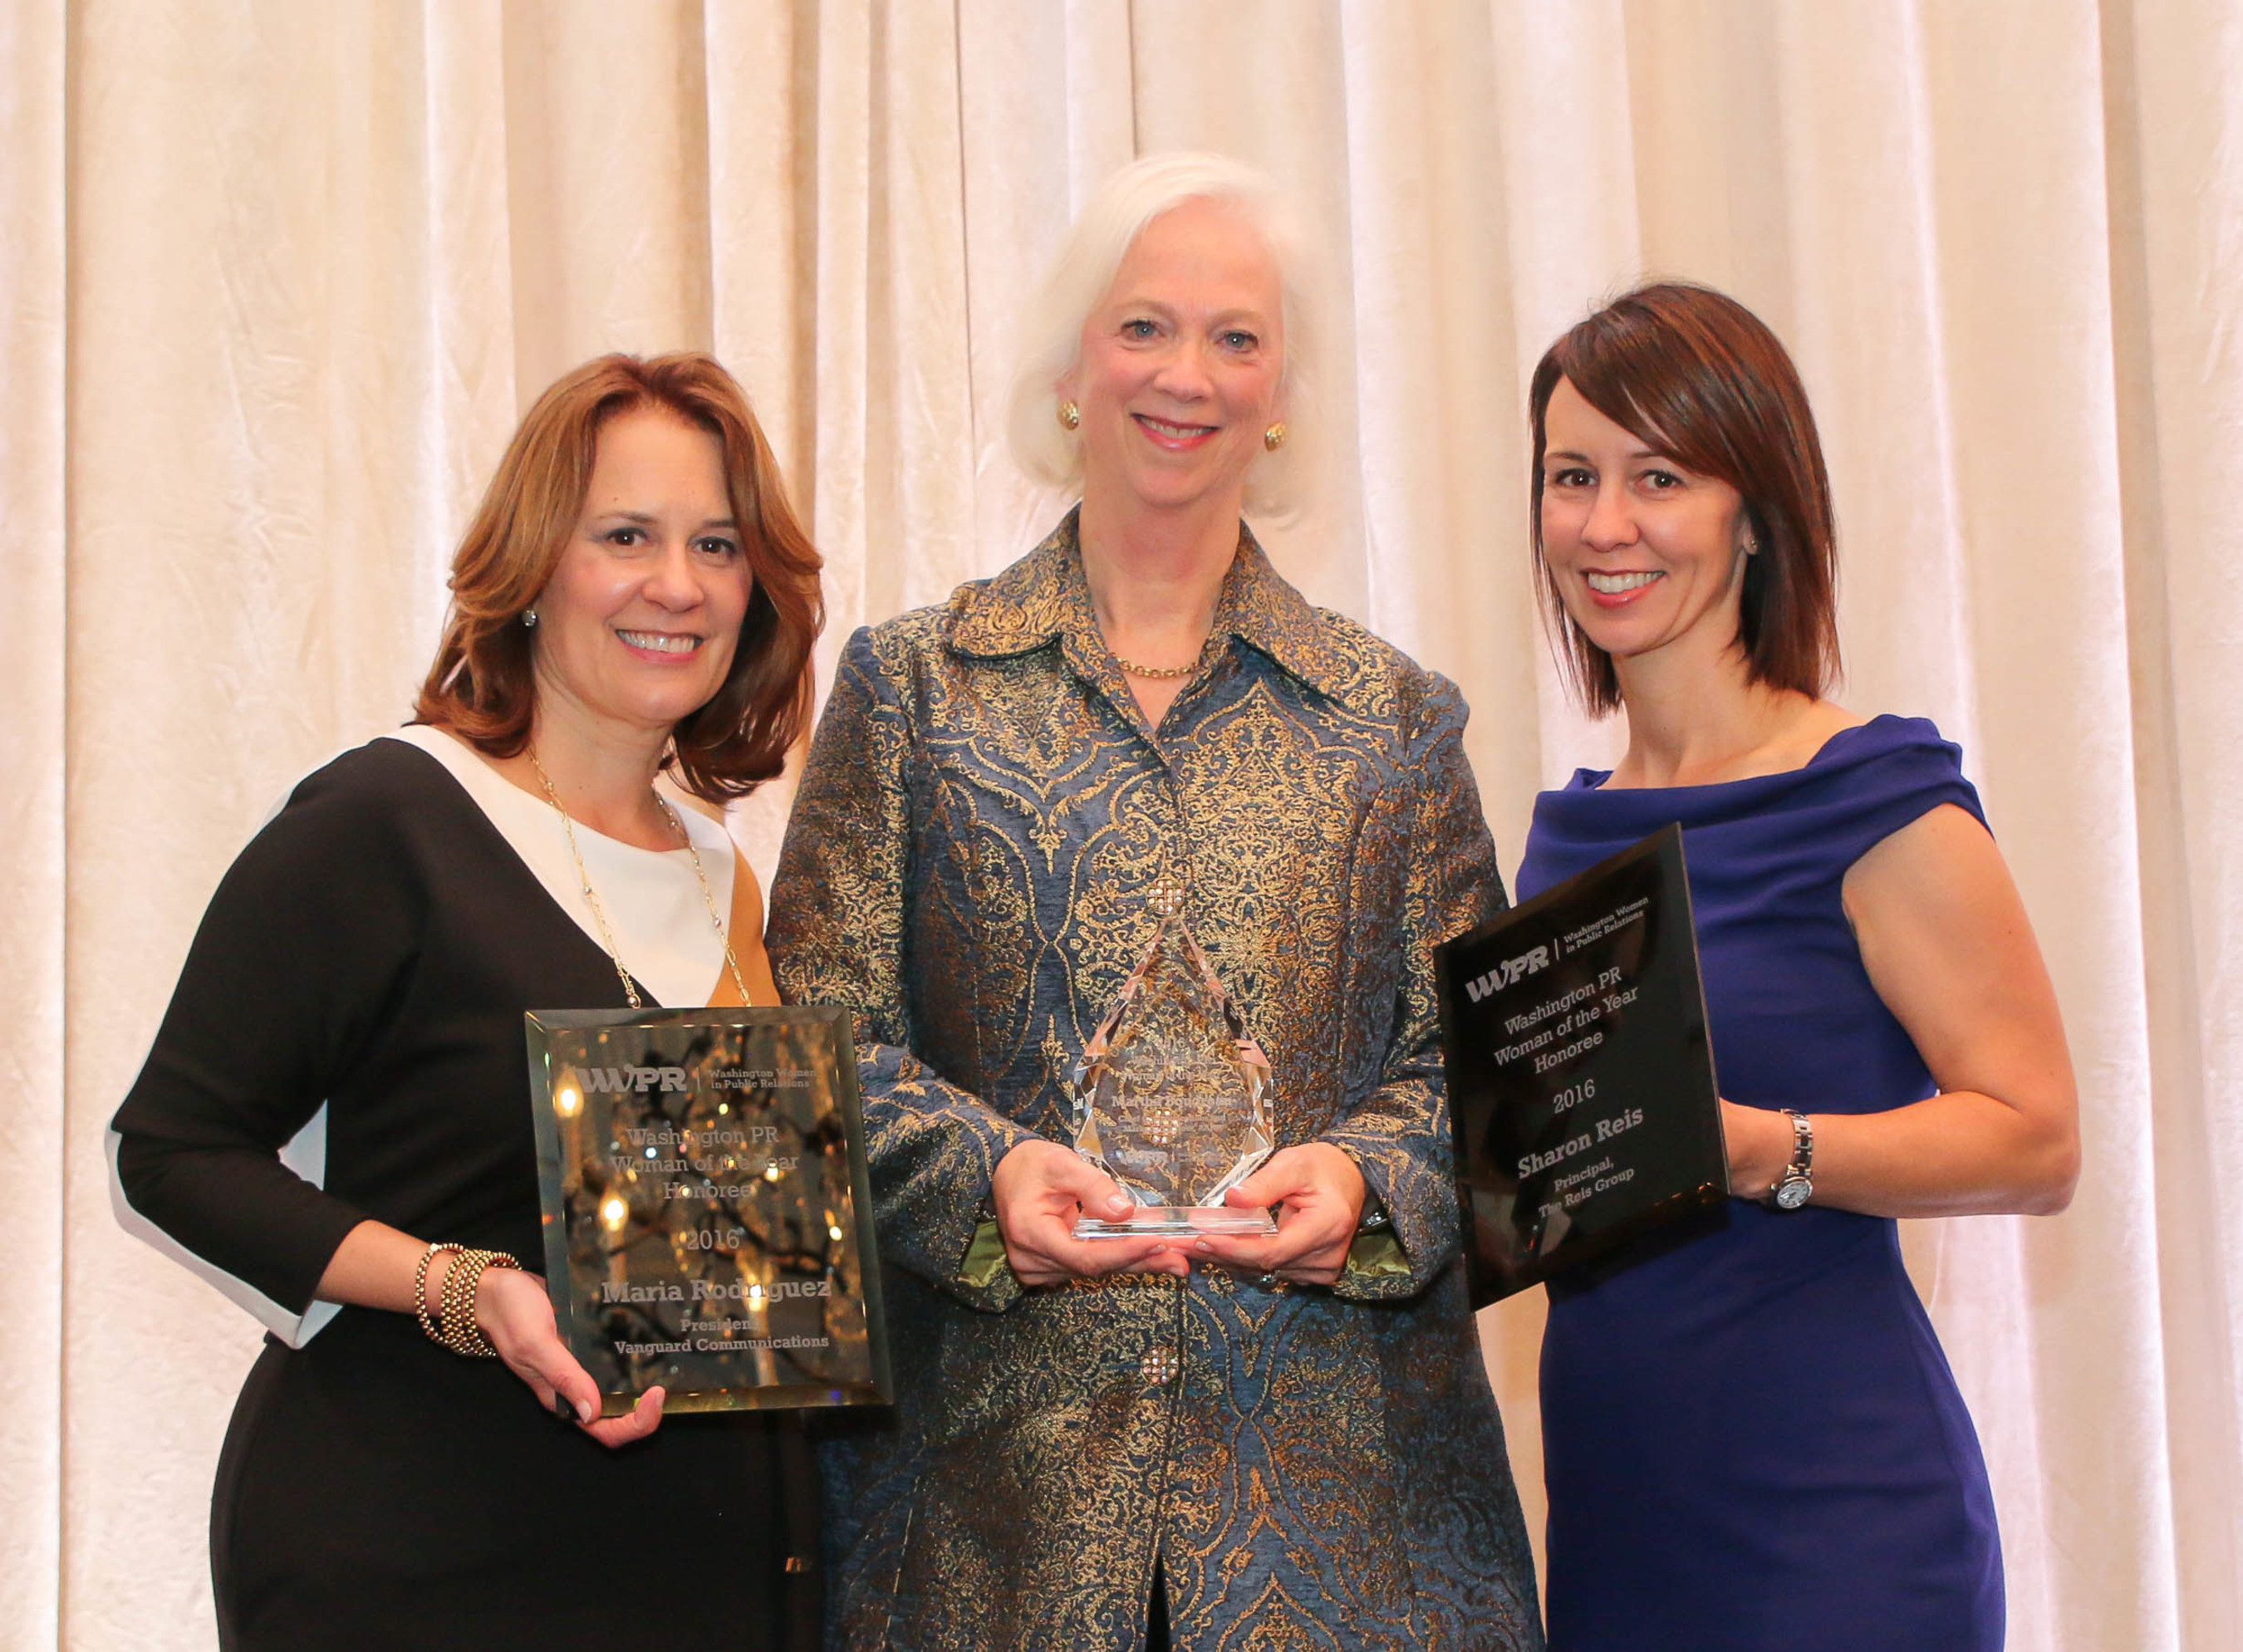 2016 WWPR PR Woman of the Year Martha Boudreau (center) with finalists Maria Rodriguez (left) and Sharon Reis (right)